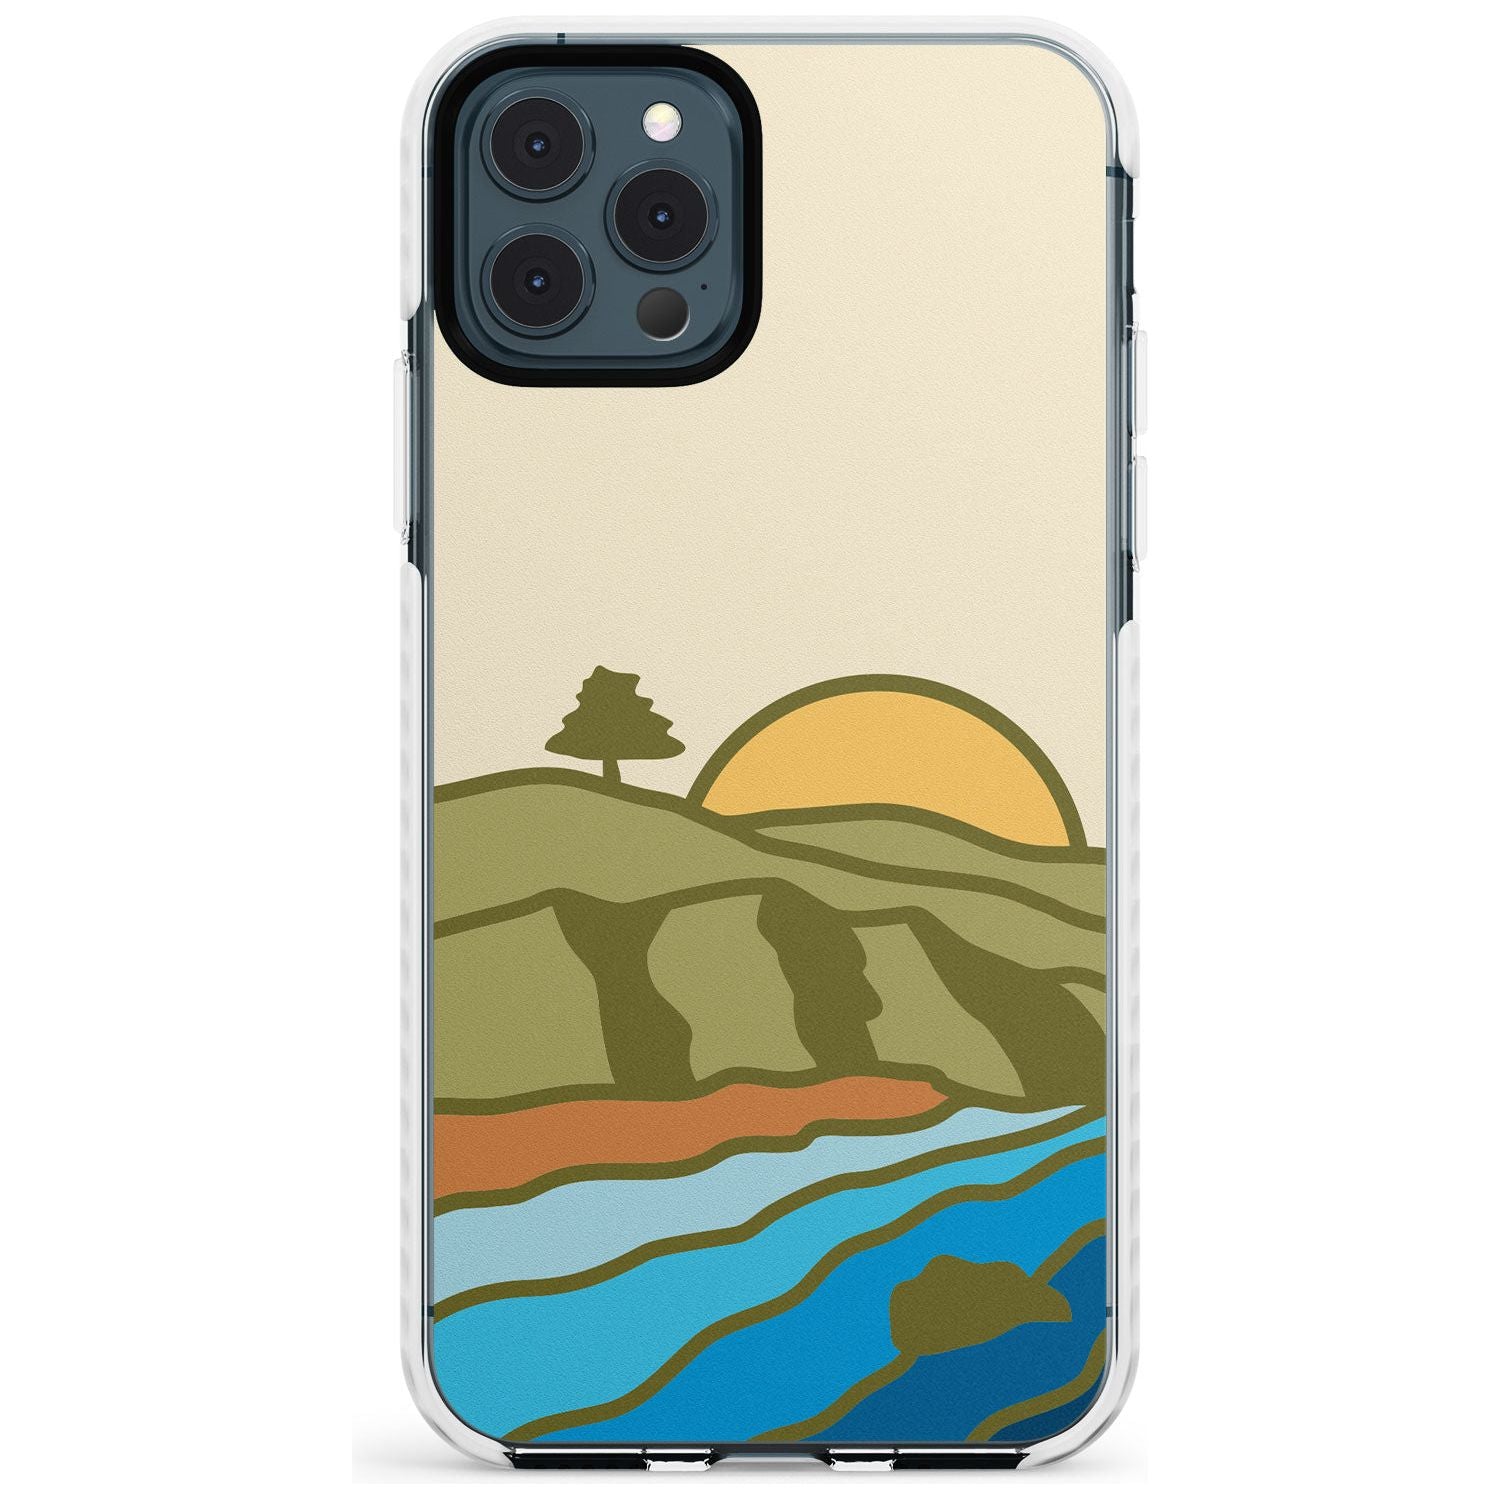 North Sunset Slim TPU Phone Case for iPhone 11 Pro Max